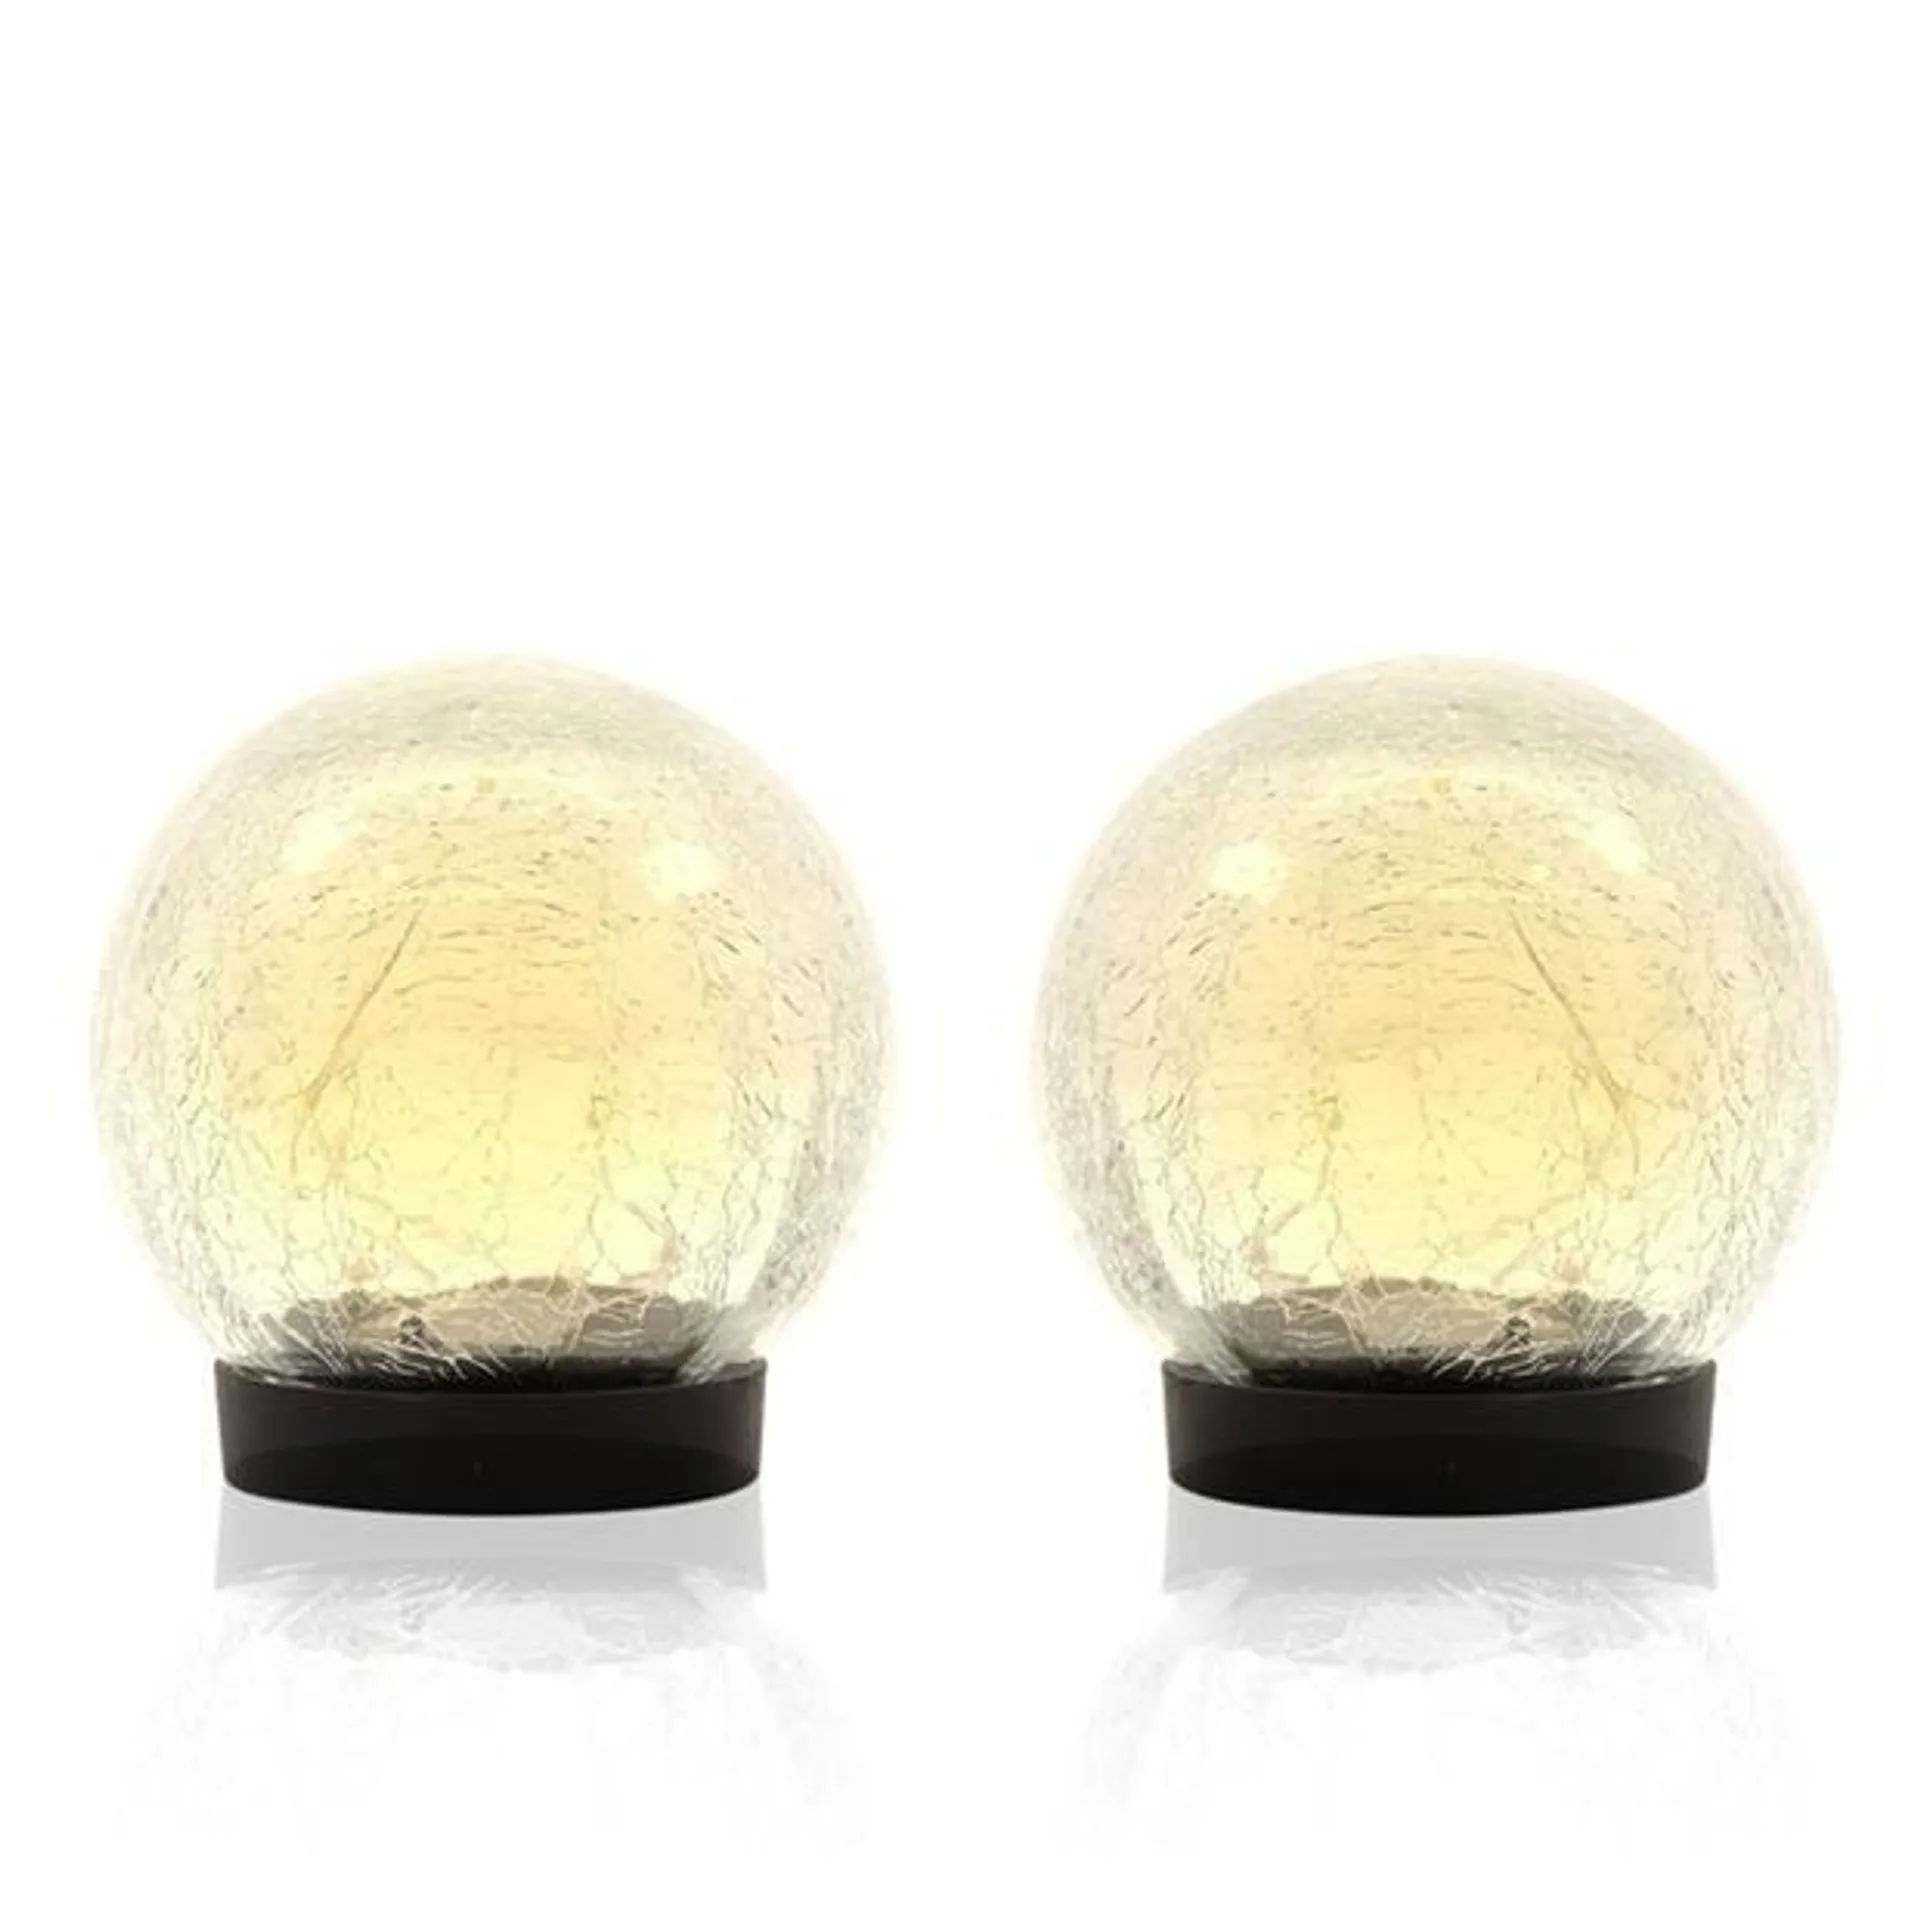 Pair of Solar Powered LED Crackle Balls